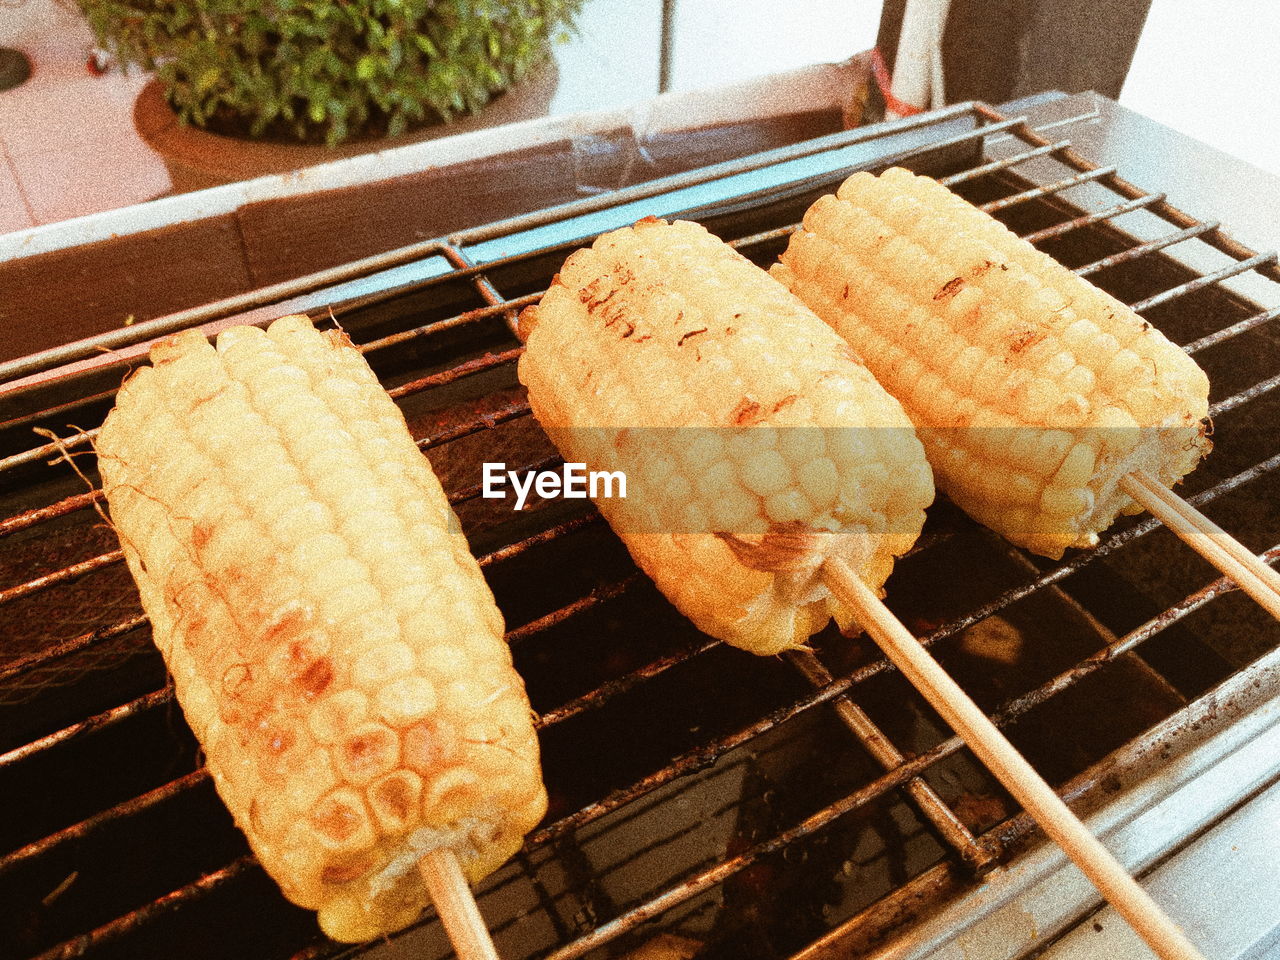 HIGH ANGLE VIEW OF MEAT ON GRILL